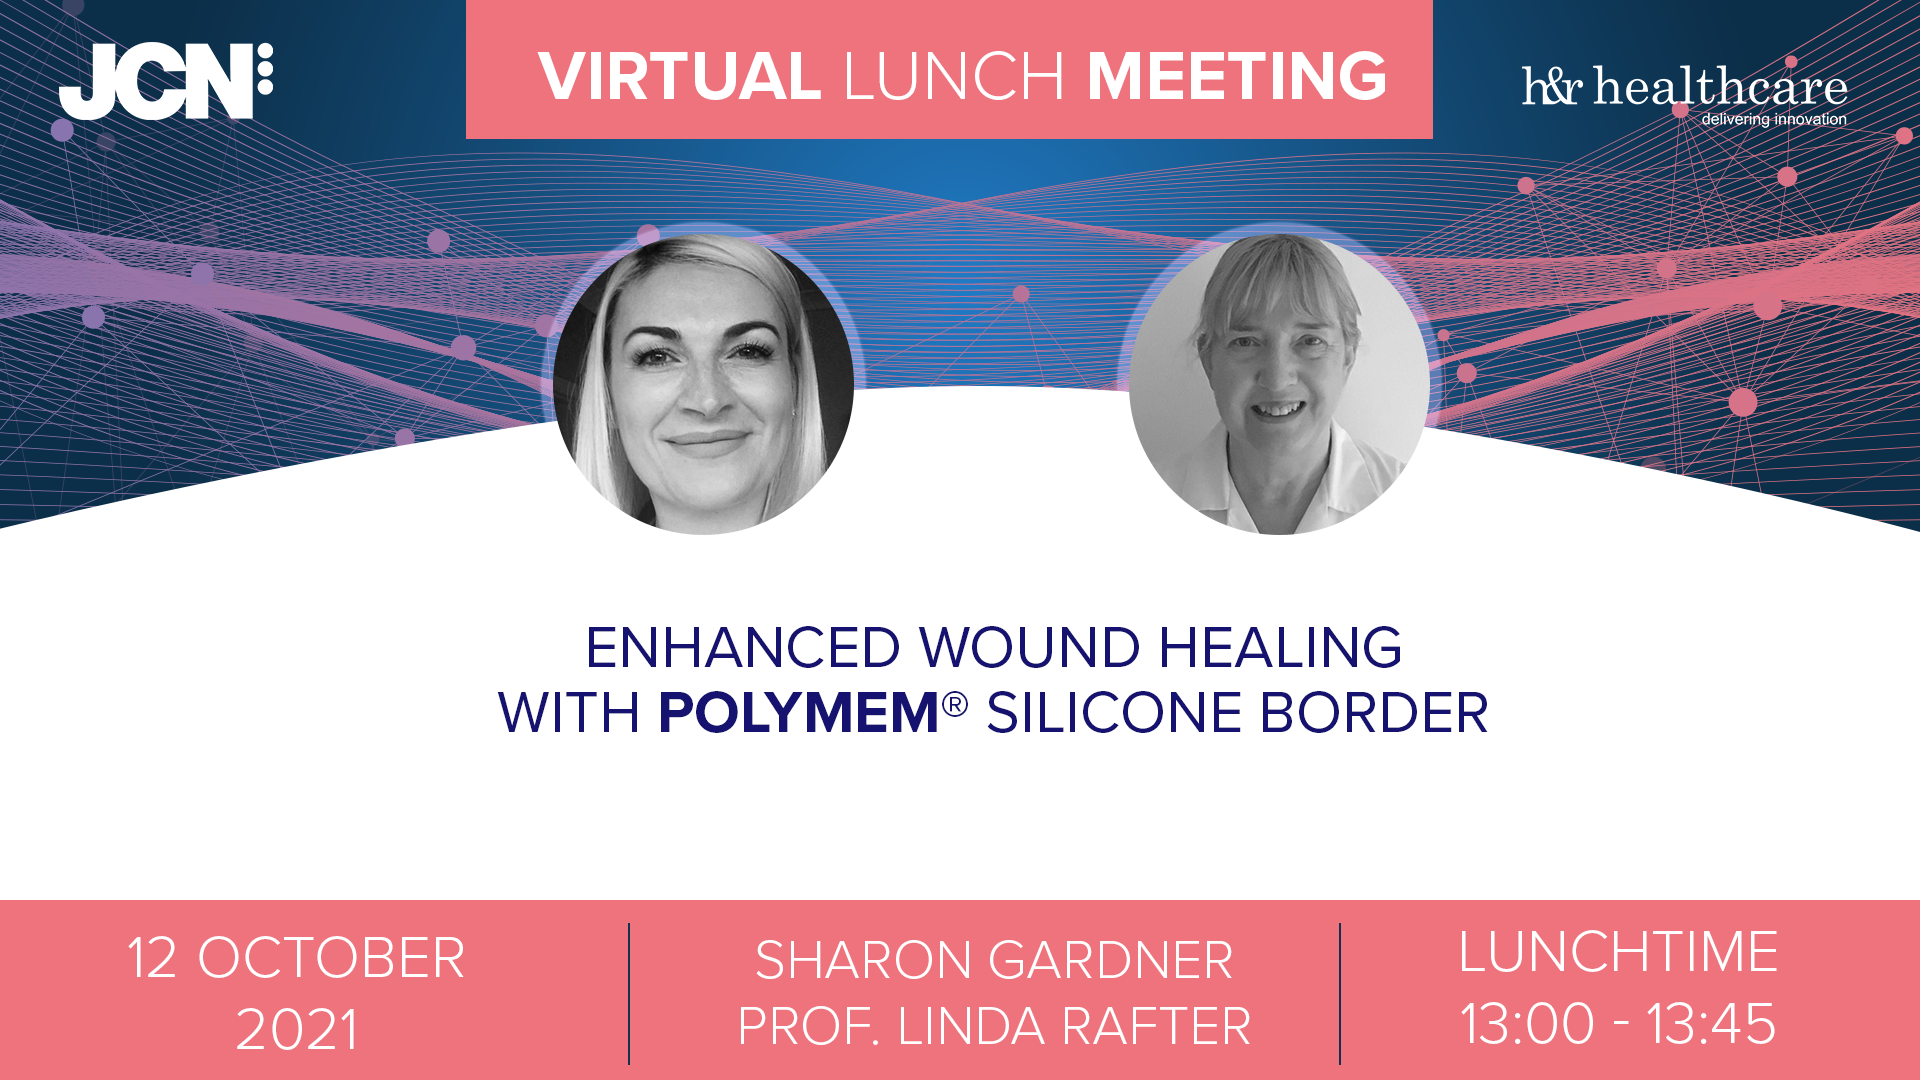 Virtual Lunch Meeting: Enhanced wound healing with PolyMem® Silicone Border